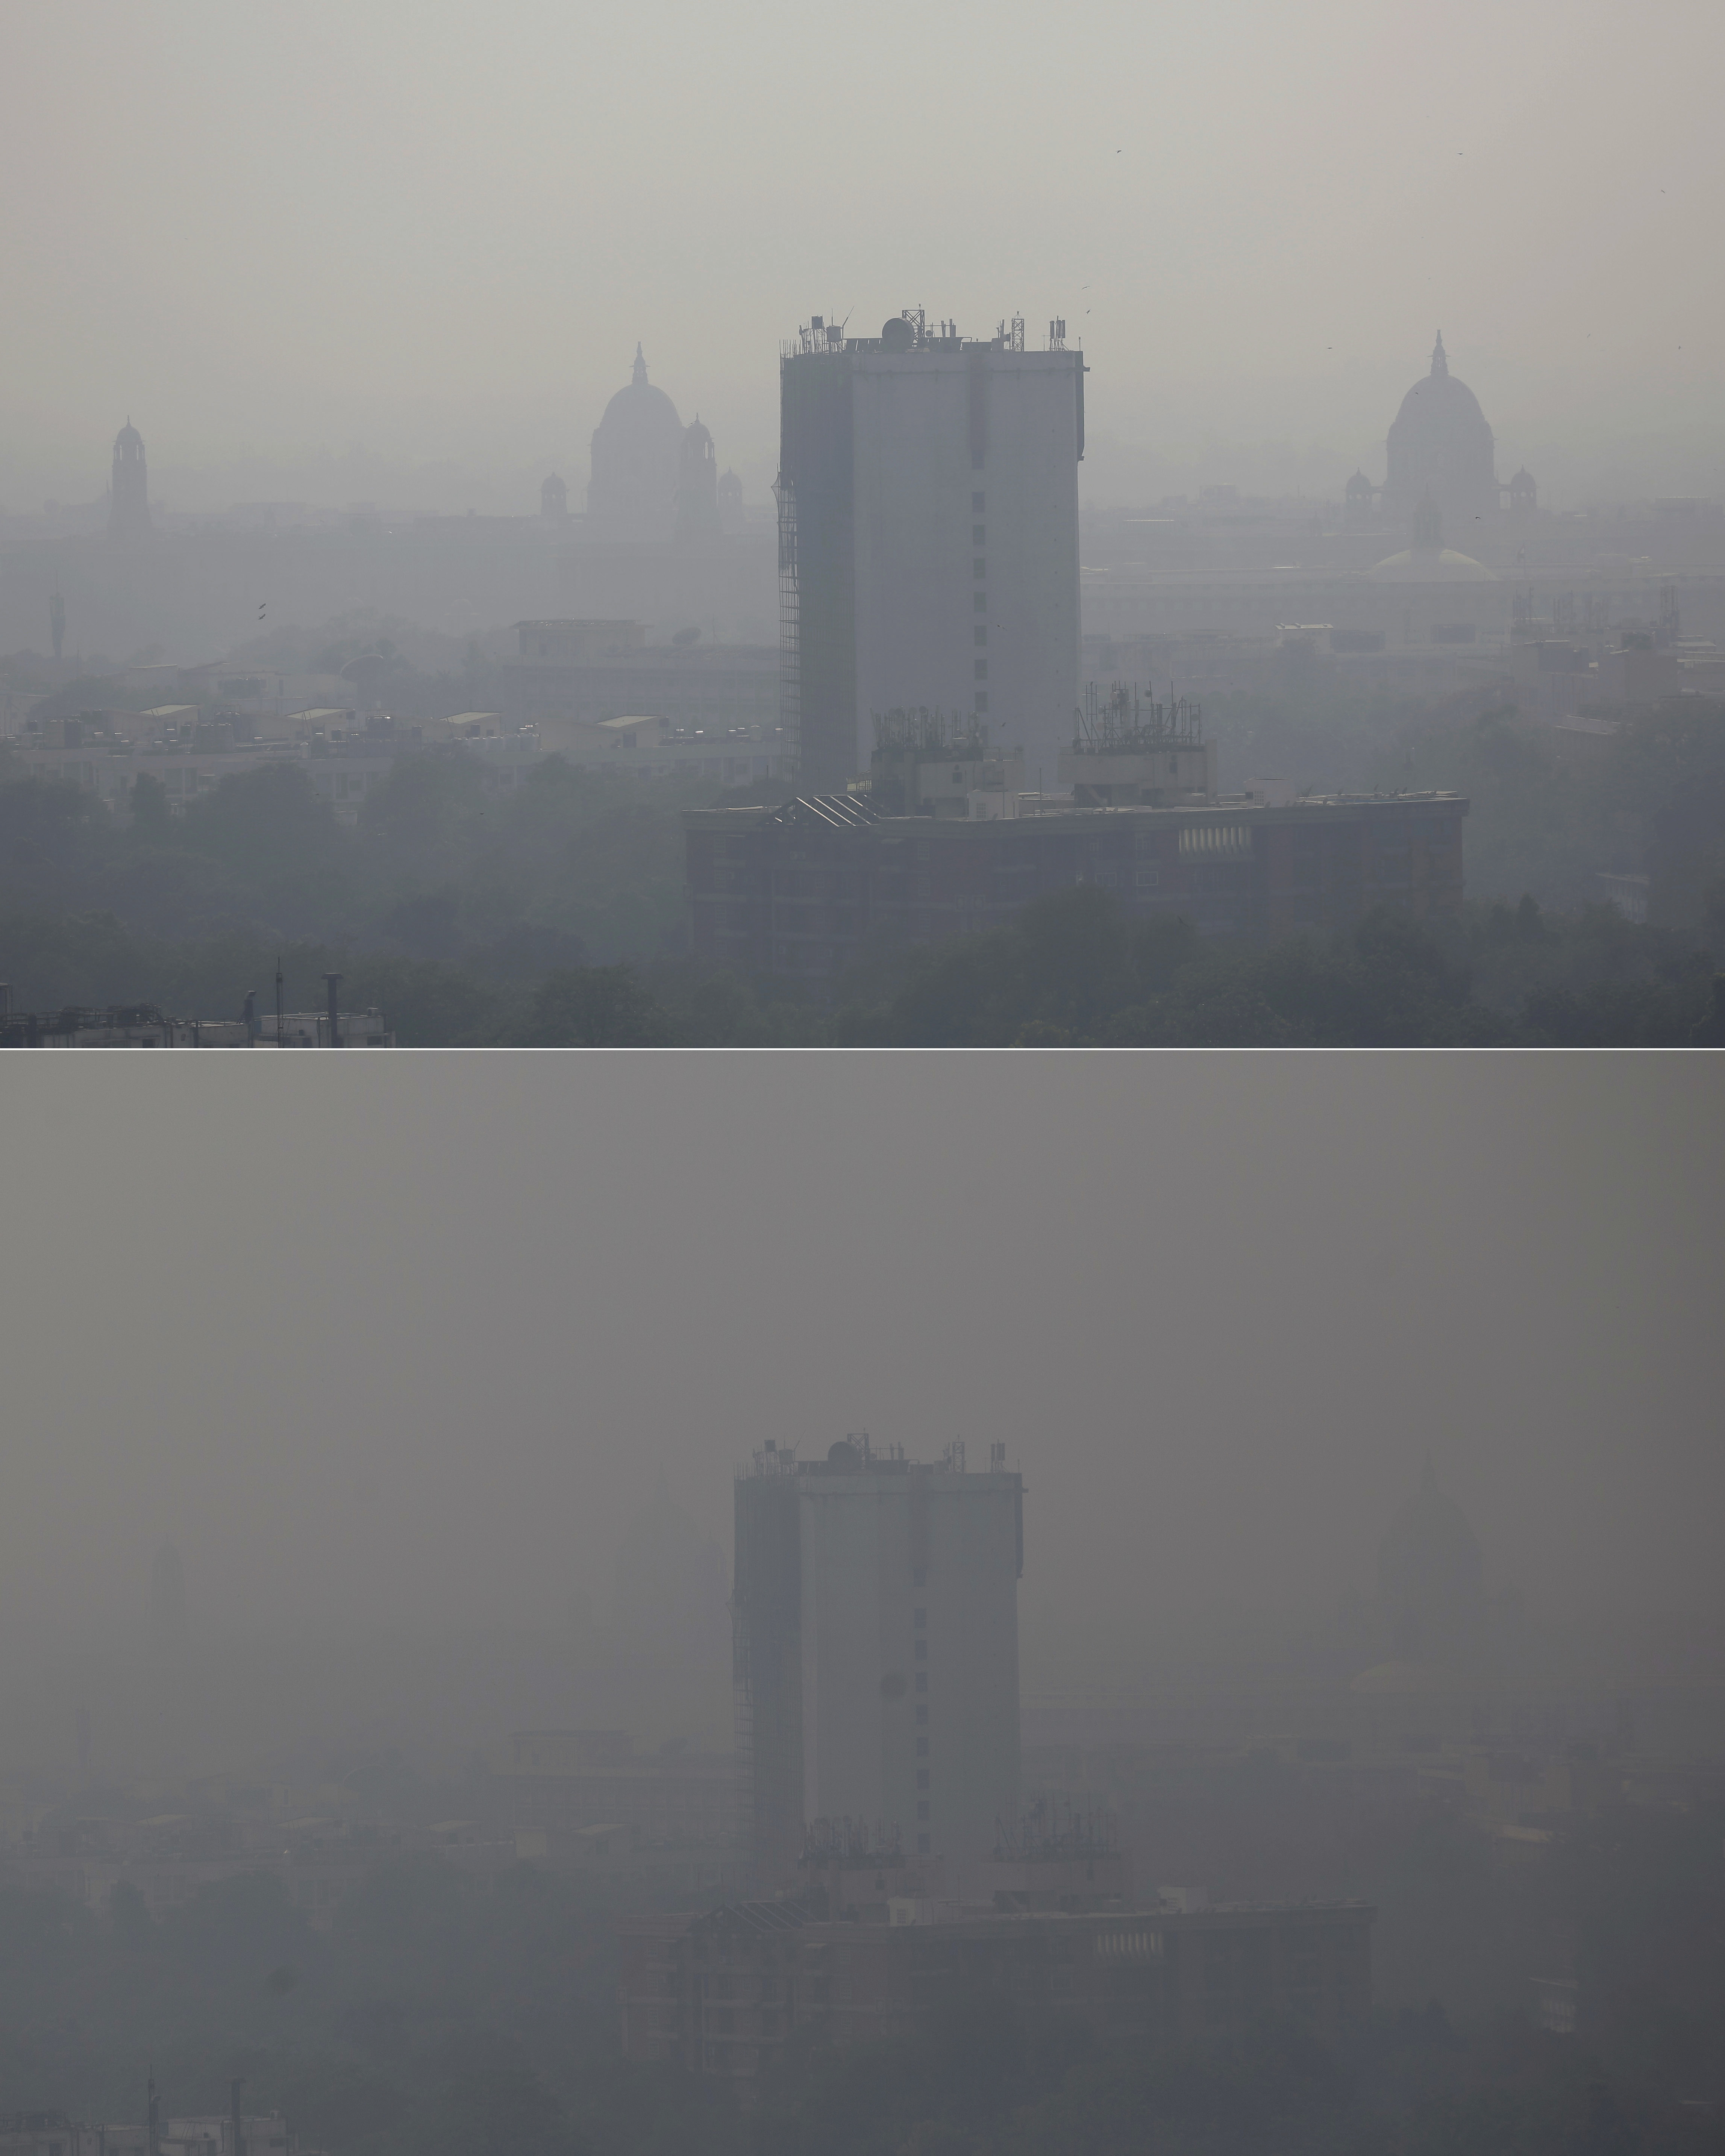 In this combination of two photos, the New Delhi skyline is seen enveloped in smog on Friday, Oct. 28, 2016, top, and a day after Diwali festival on Monday, Oct. 31, 2016, bottom. As Indians wake Monday to smoke-filled skies from a weekend of festival fireworks for the Hindu holiday of Diwali, New Delhi's worst season for air pollution begins, with dire consequences. A new report from UNICEF says about a third of the 2 billion children in the world who are breathing toxic air live in northern India and neighboring countries, risking serious health effects including damage to their lungs, brains and other organs. (AP Photo/Altaf Qadri, top, and Tsering Topgyal, bottom)